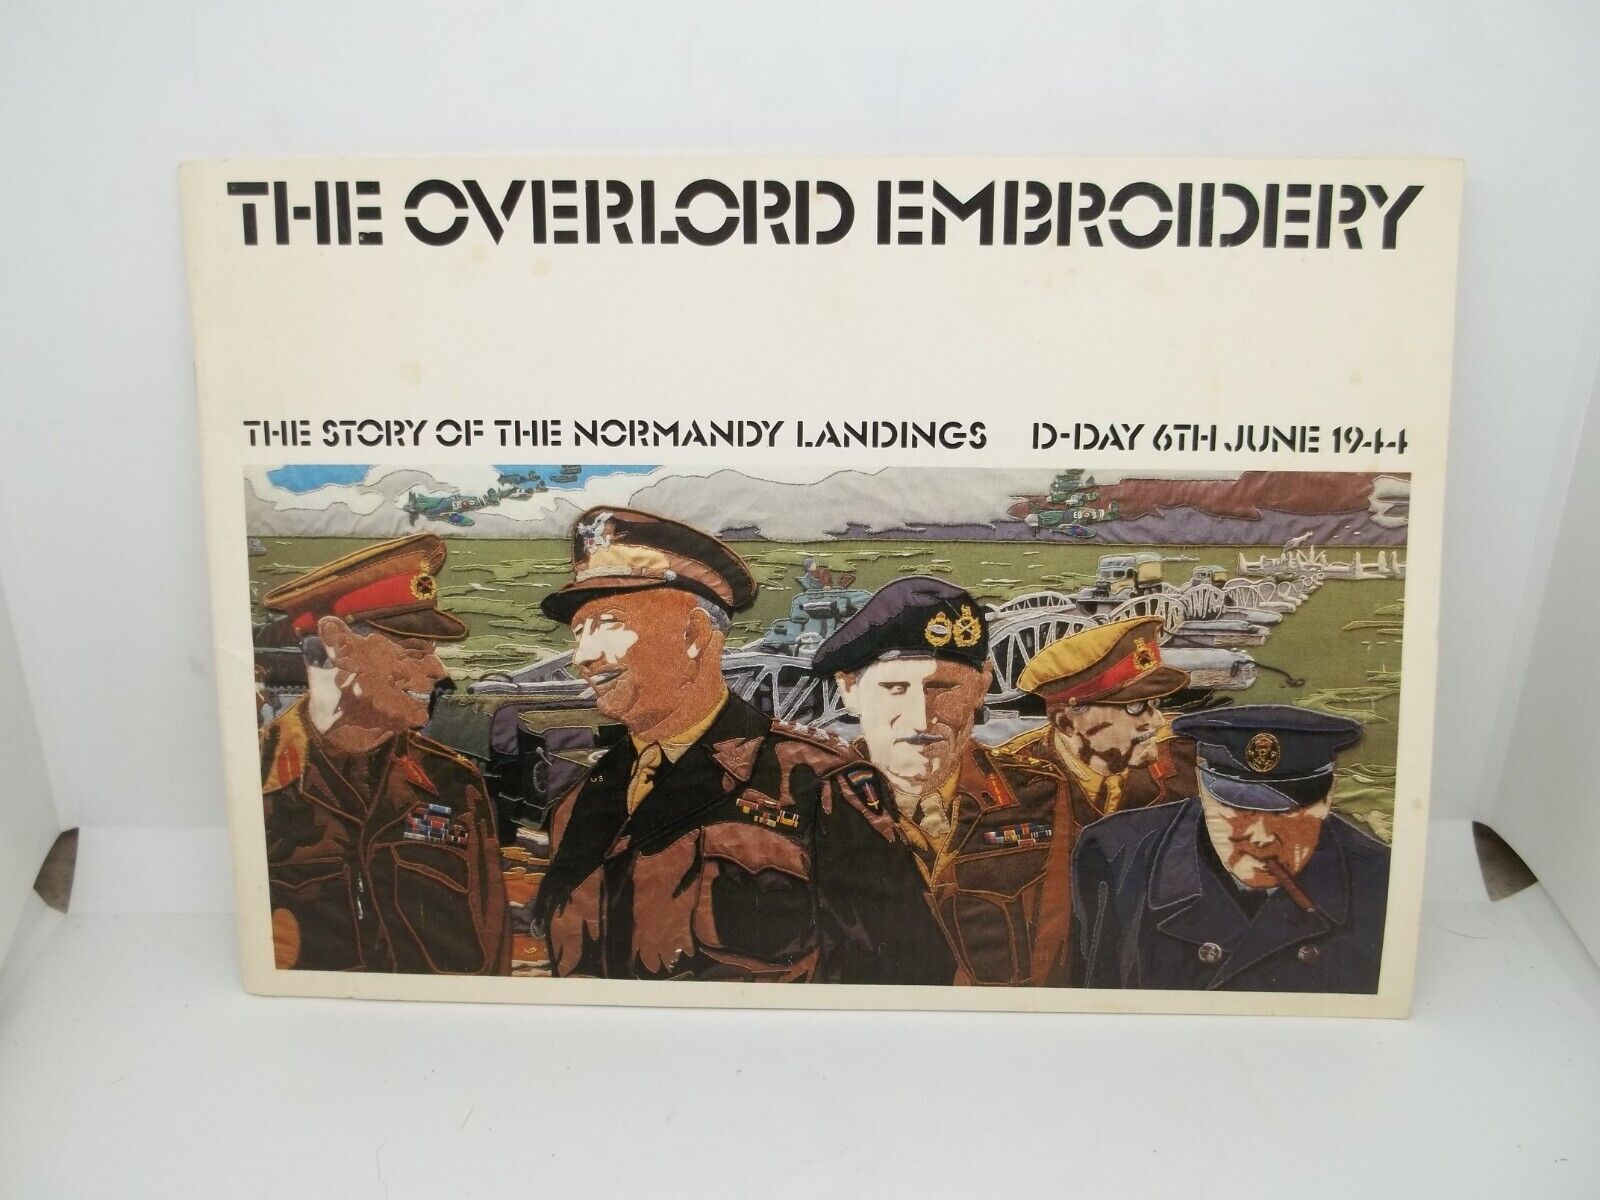 OPERATION OVERLORD EMBROIDERY Story Of The Normandy landing D-Day June 6 1944